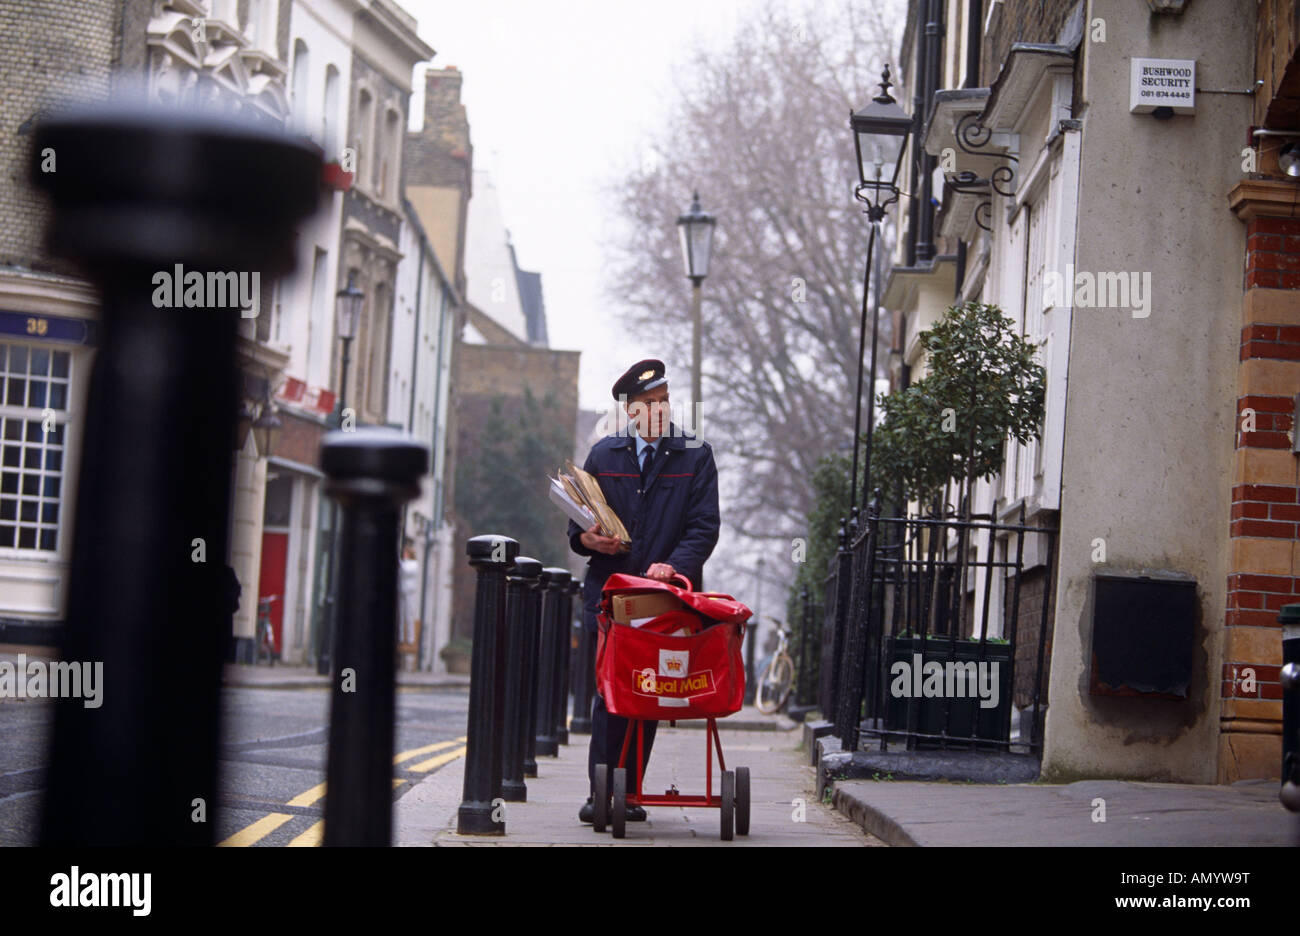 royal-mail-postman-pushes-trolley-delivering-royal-mailchelsea-AMYW9T.jpg